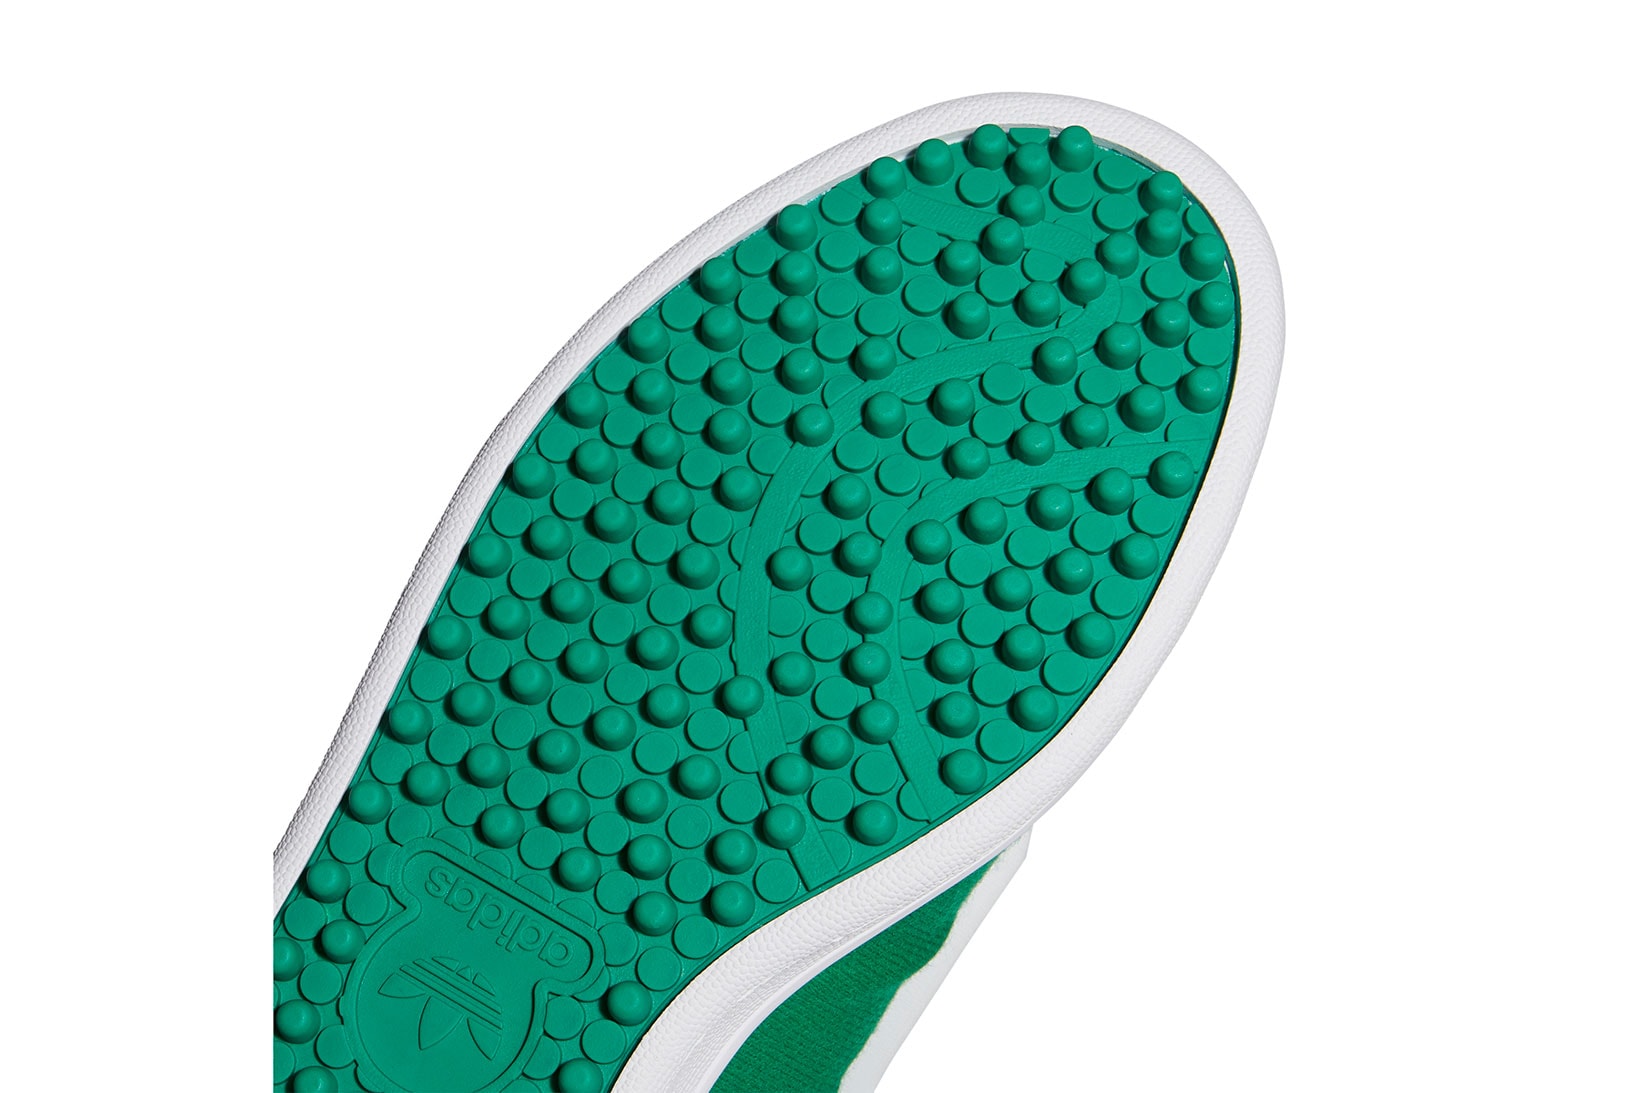 adidas originals golf stan smith sneakers sustainable green white footwear shoes kicks sneakerhead lateral sole